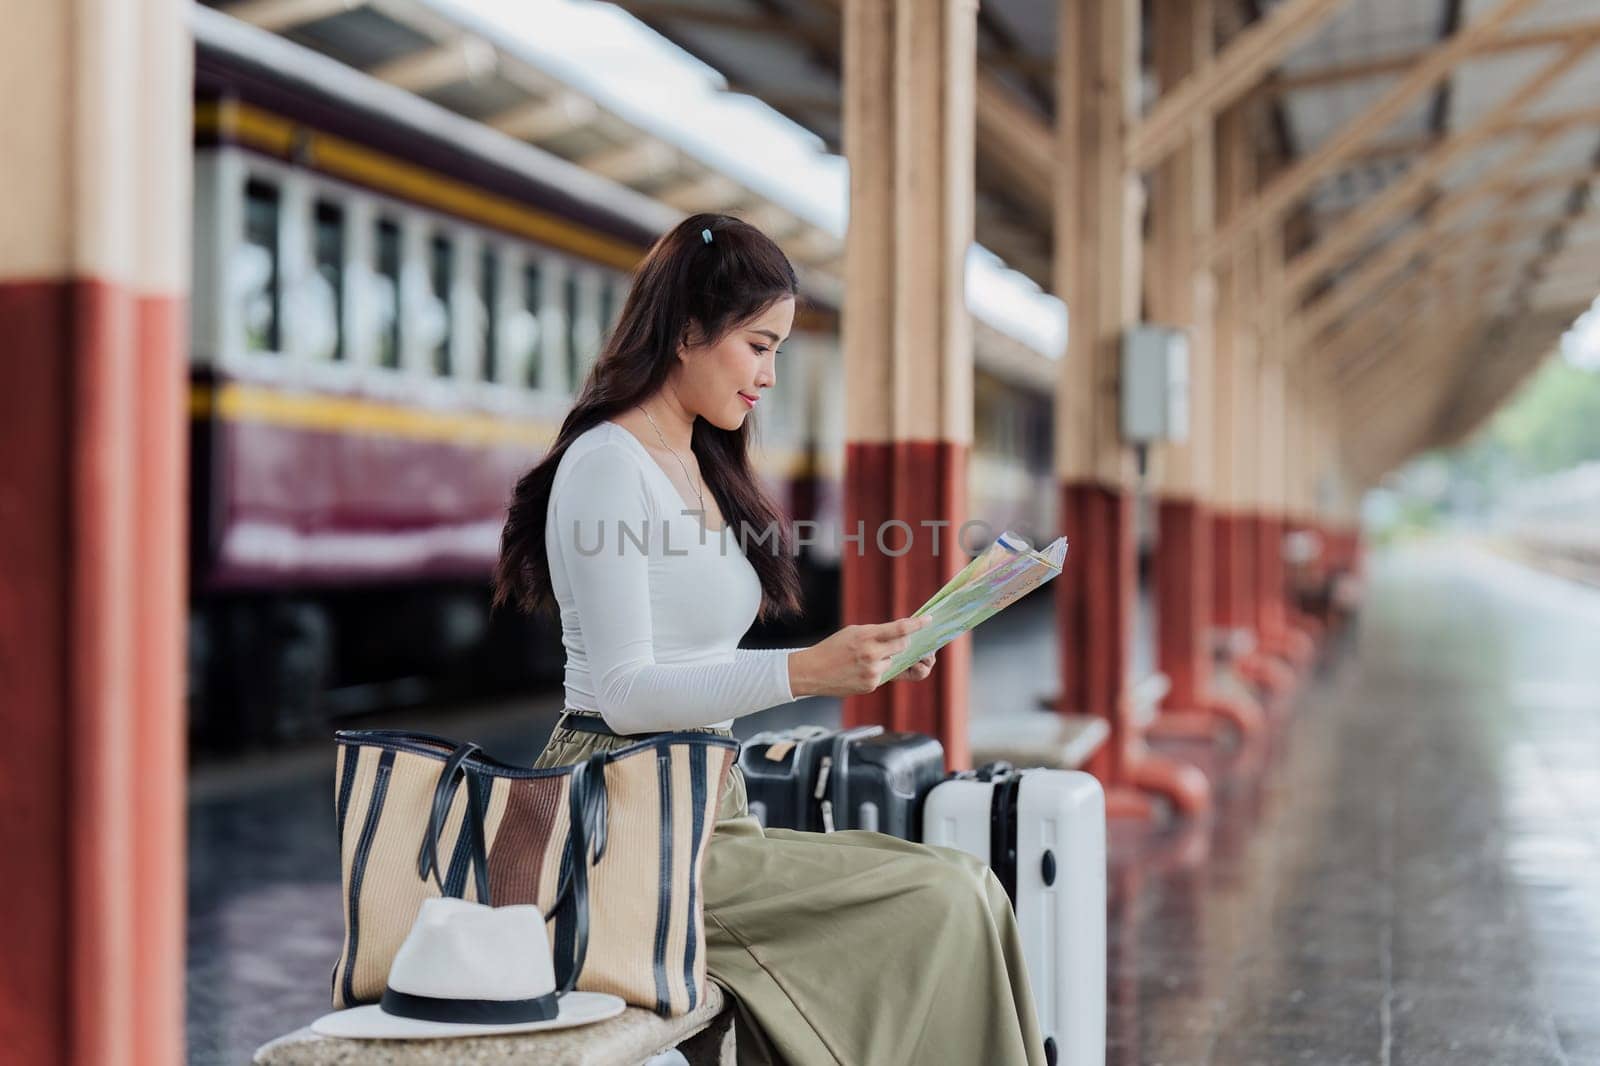 Woman traveler tourist walking with luggage at train station. Active and travel lifestyle concept.